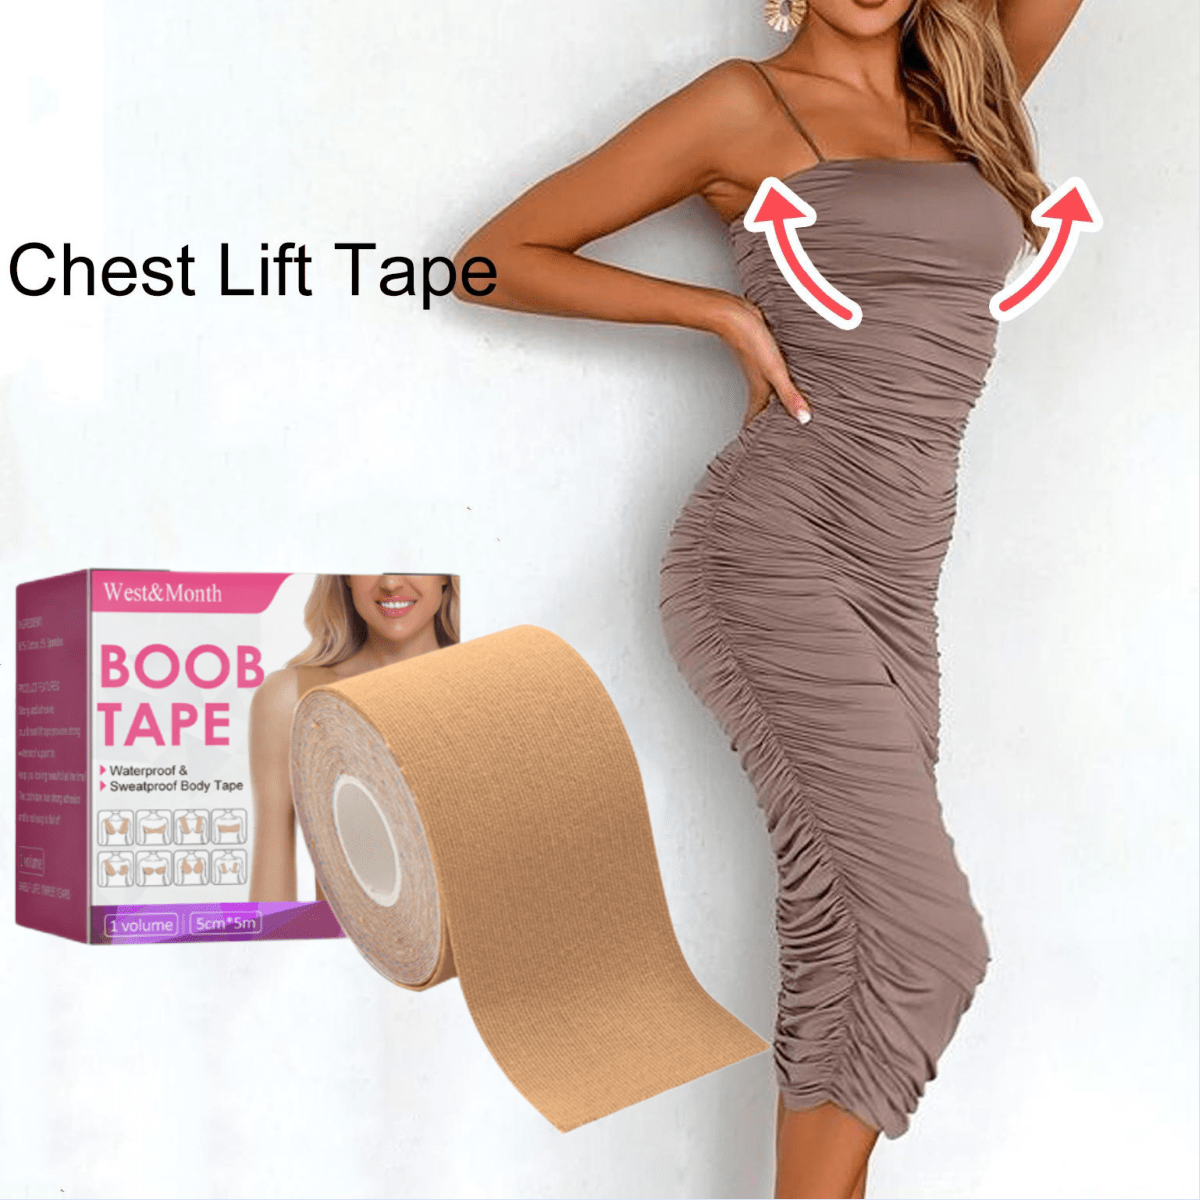 Boob Tape, Boobytape for Breast Lift, Achieve Lift & Contour of Breasts